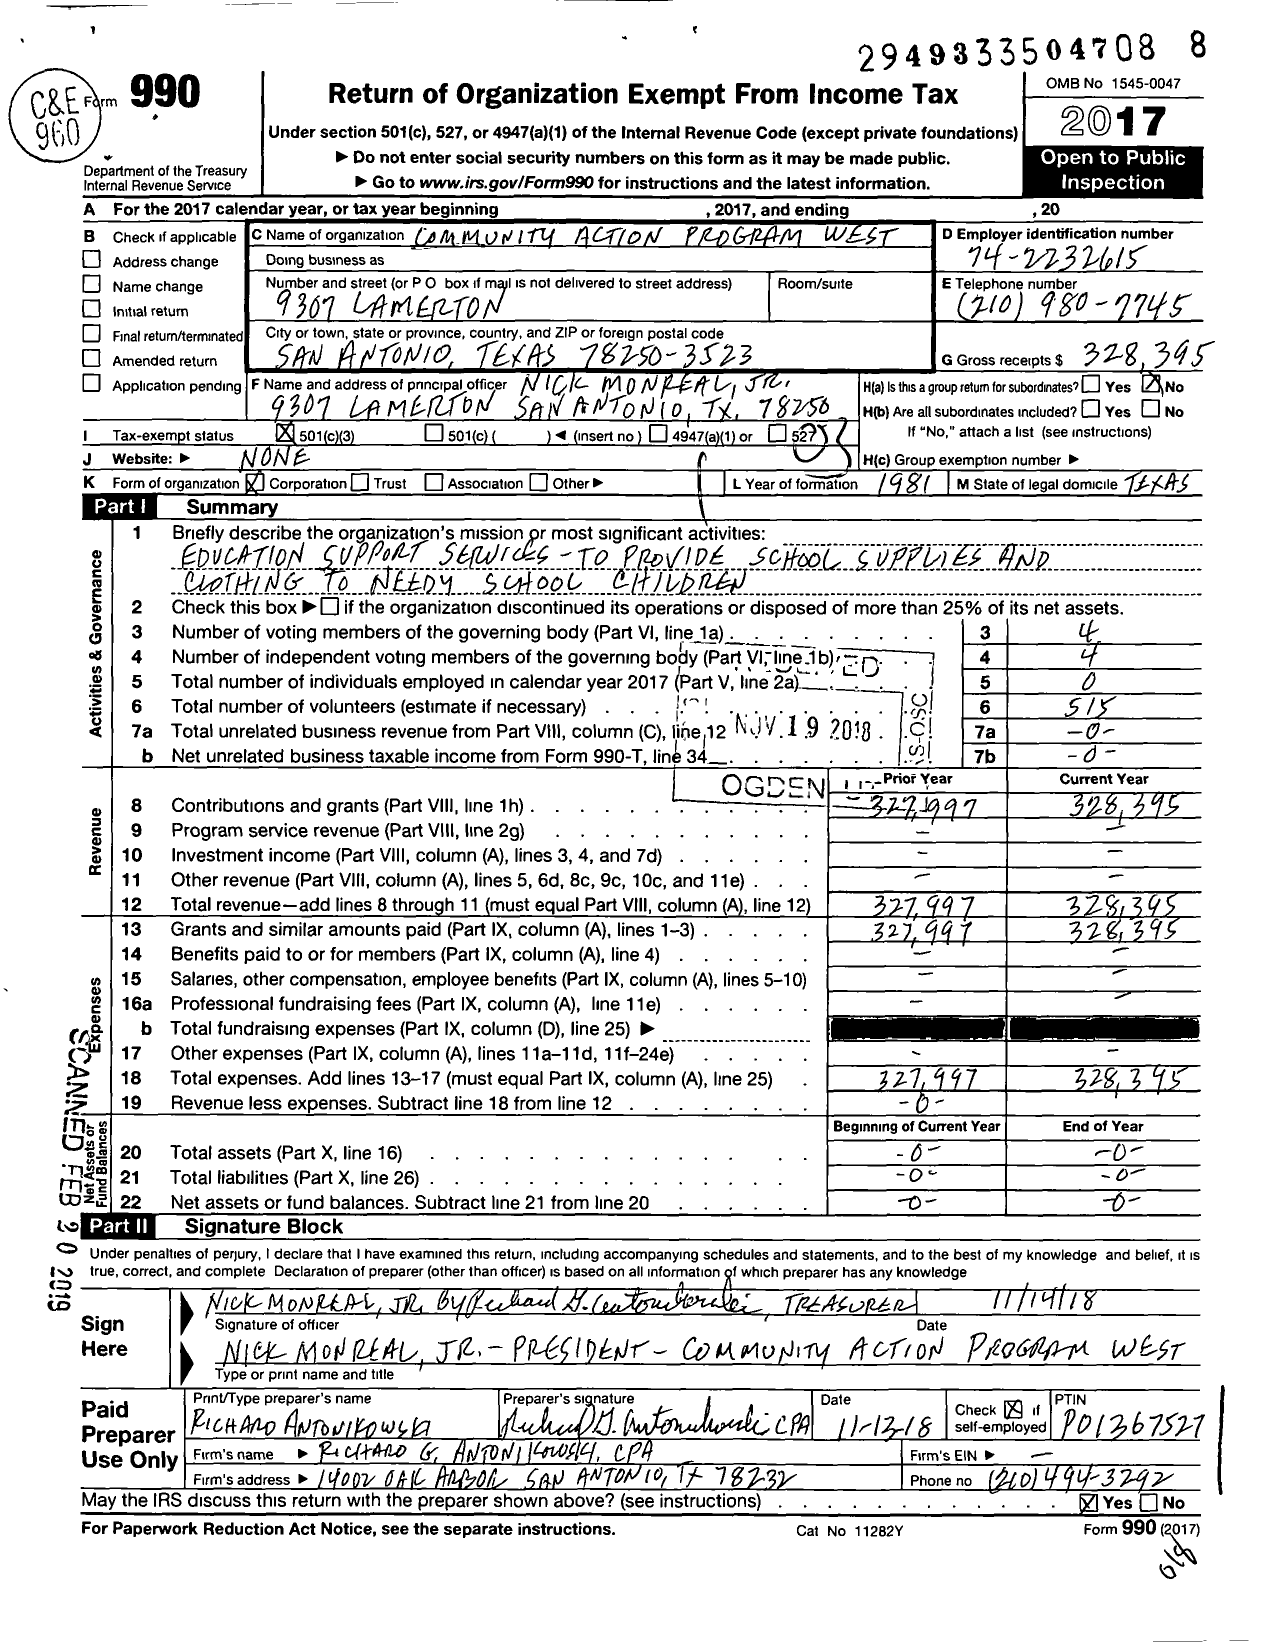 Image of first page of 2017 Form 990 for Community Action Program West